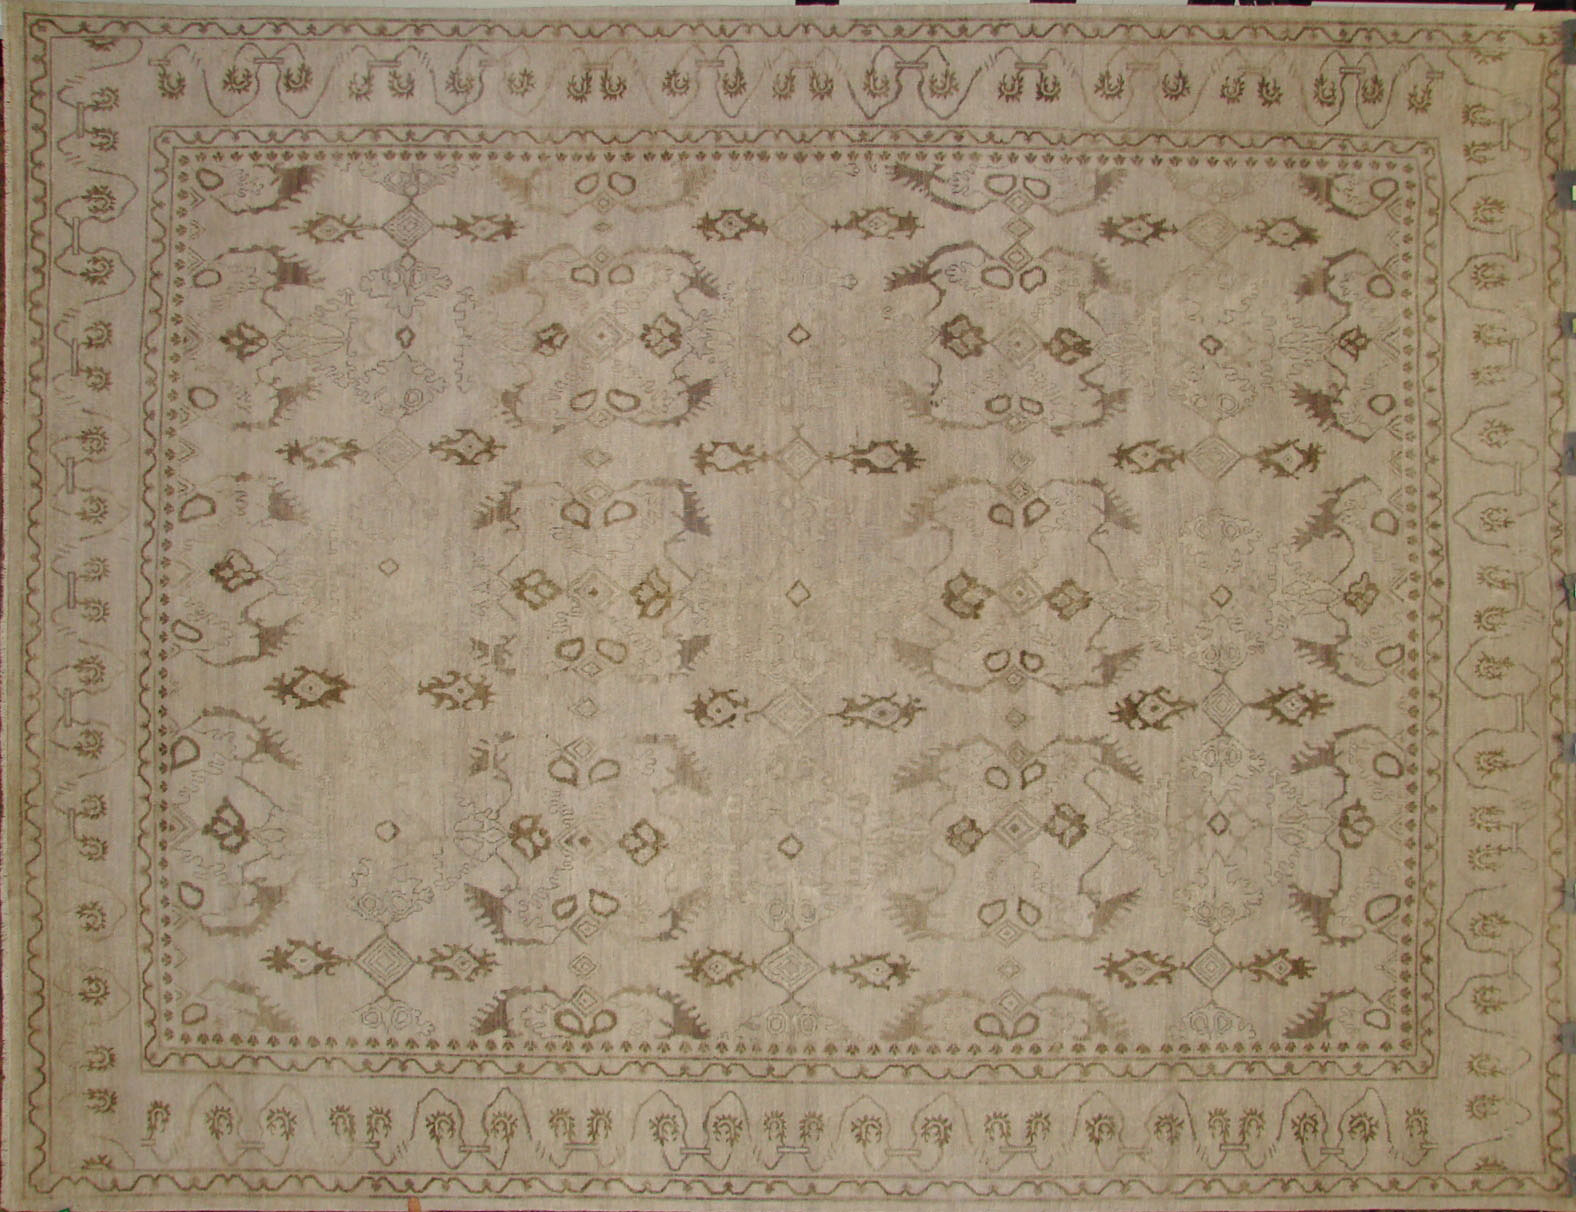 9x12 Antique Revival Hand Knotted Wool Area Rug - MR18095